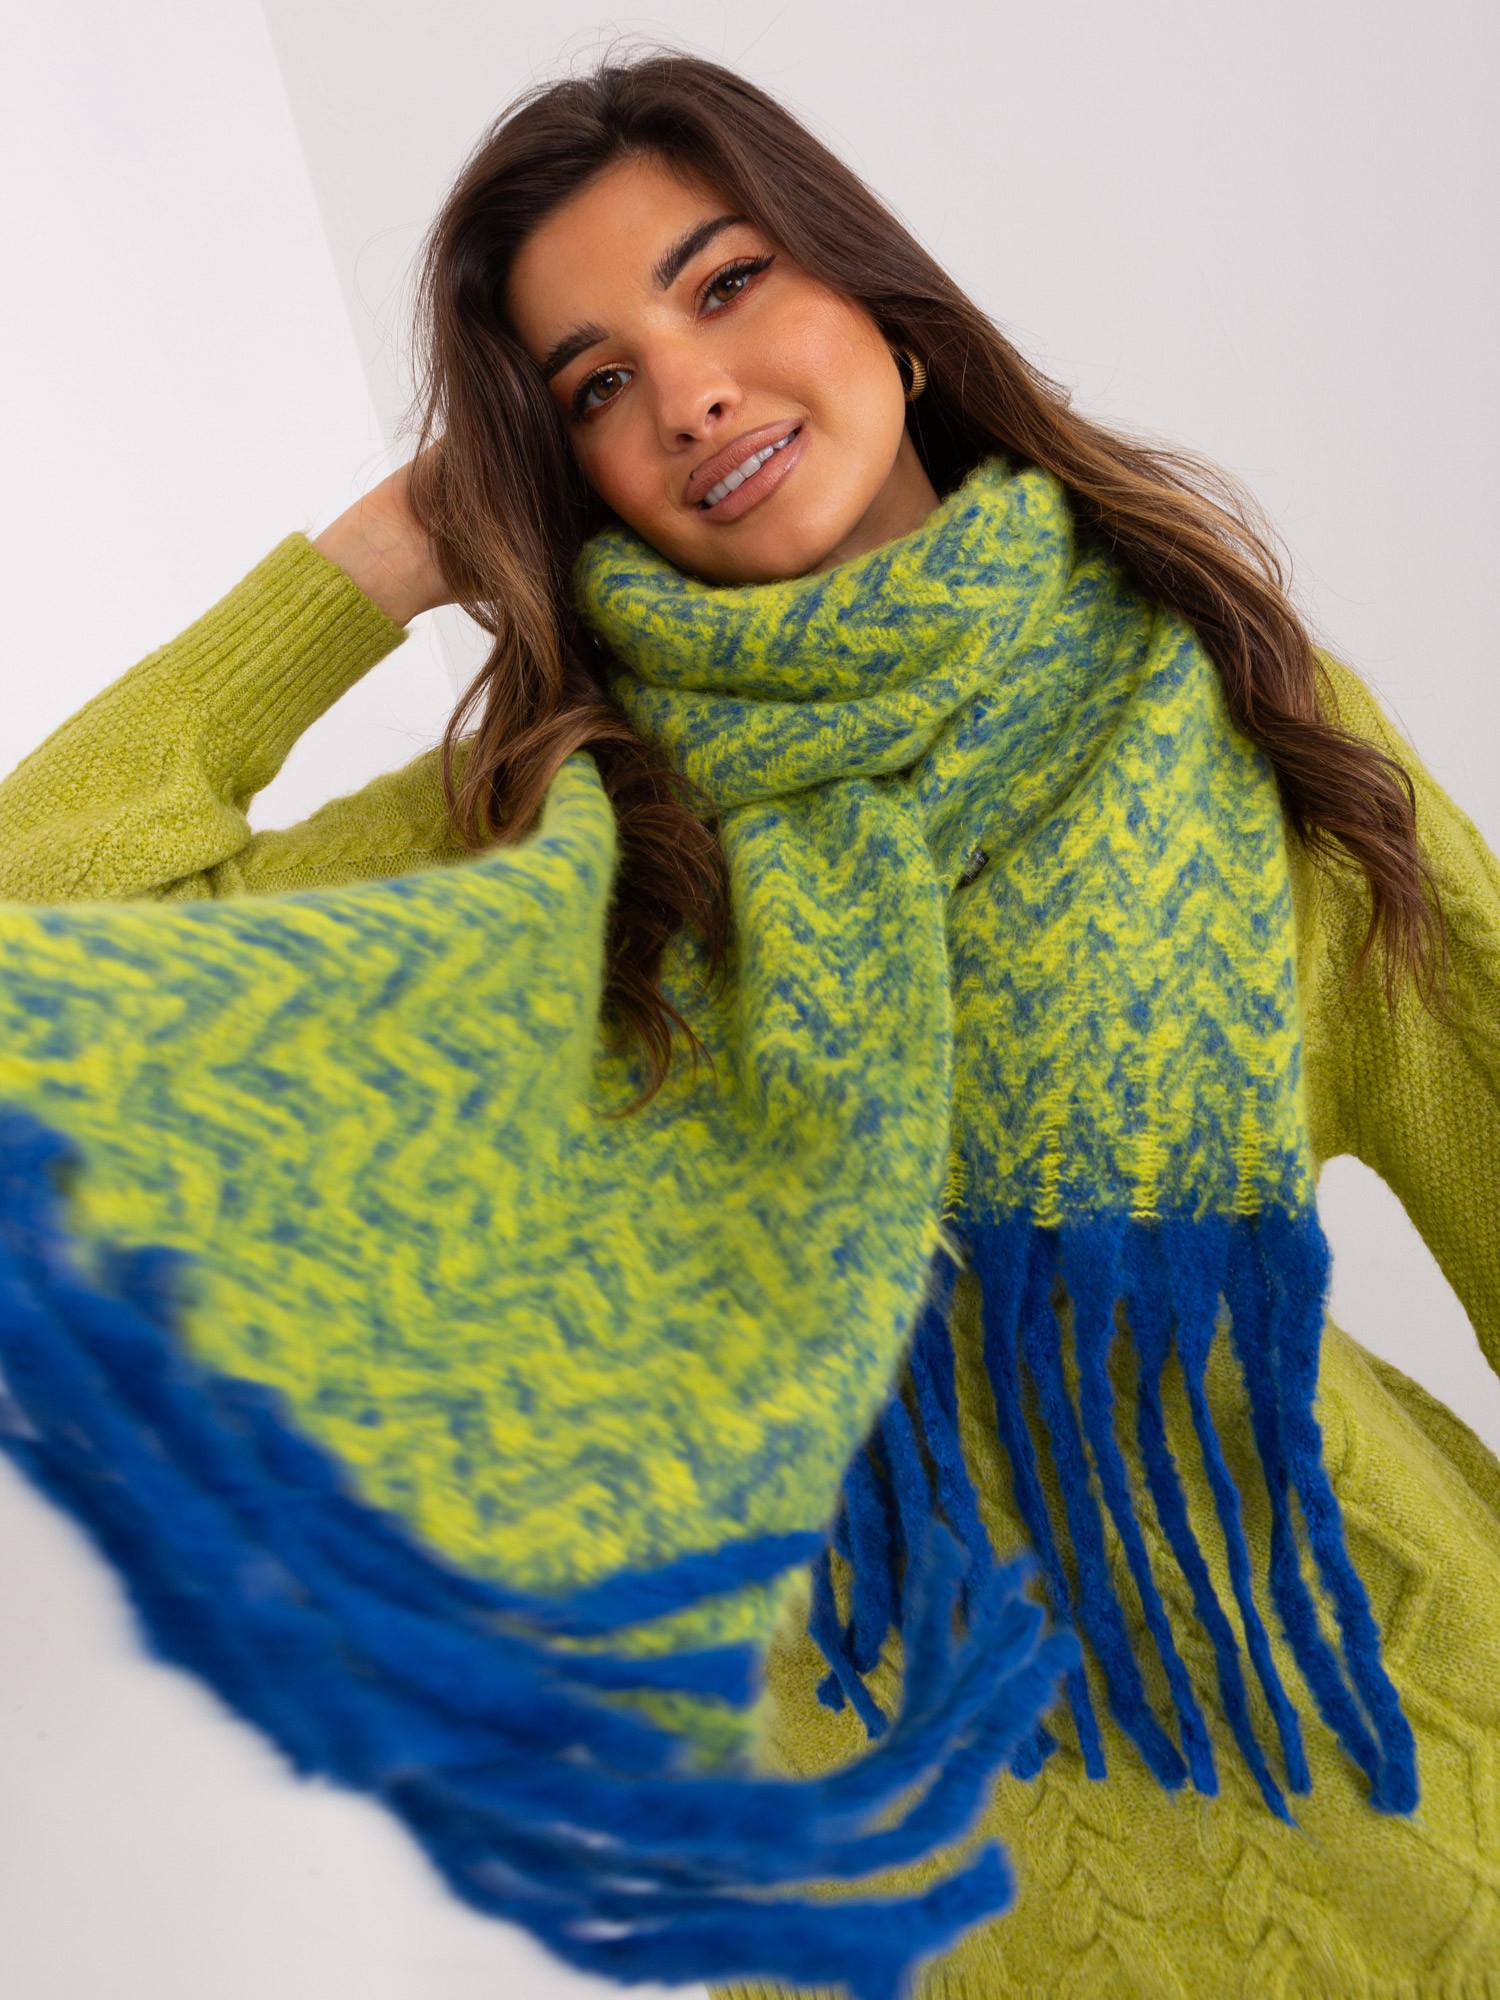 Navy blue and yellow women's scarf with patterns